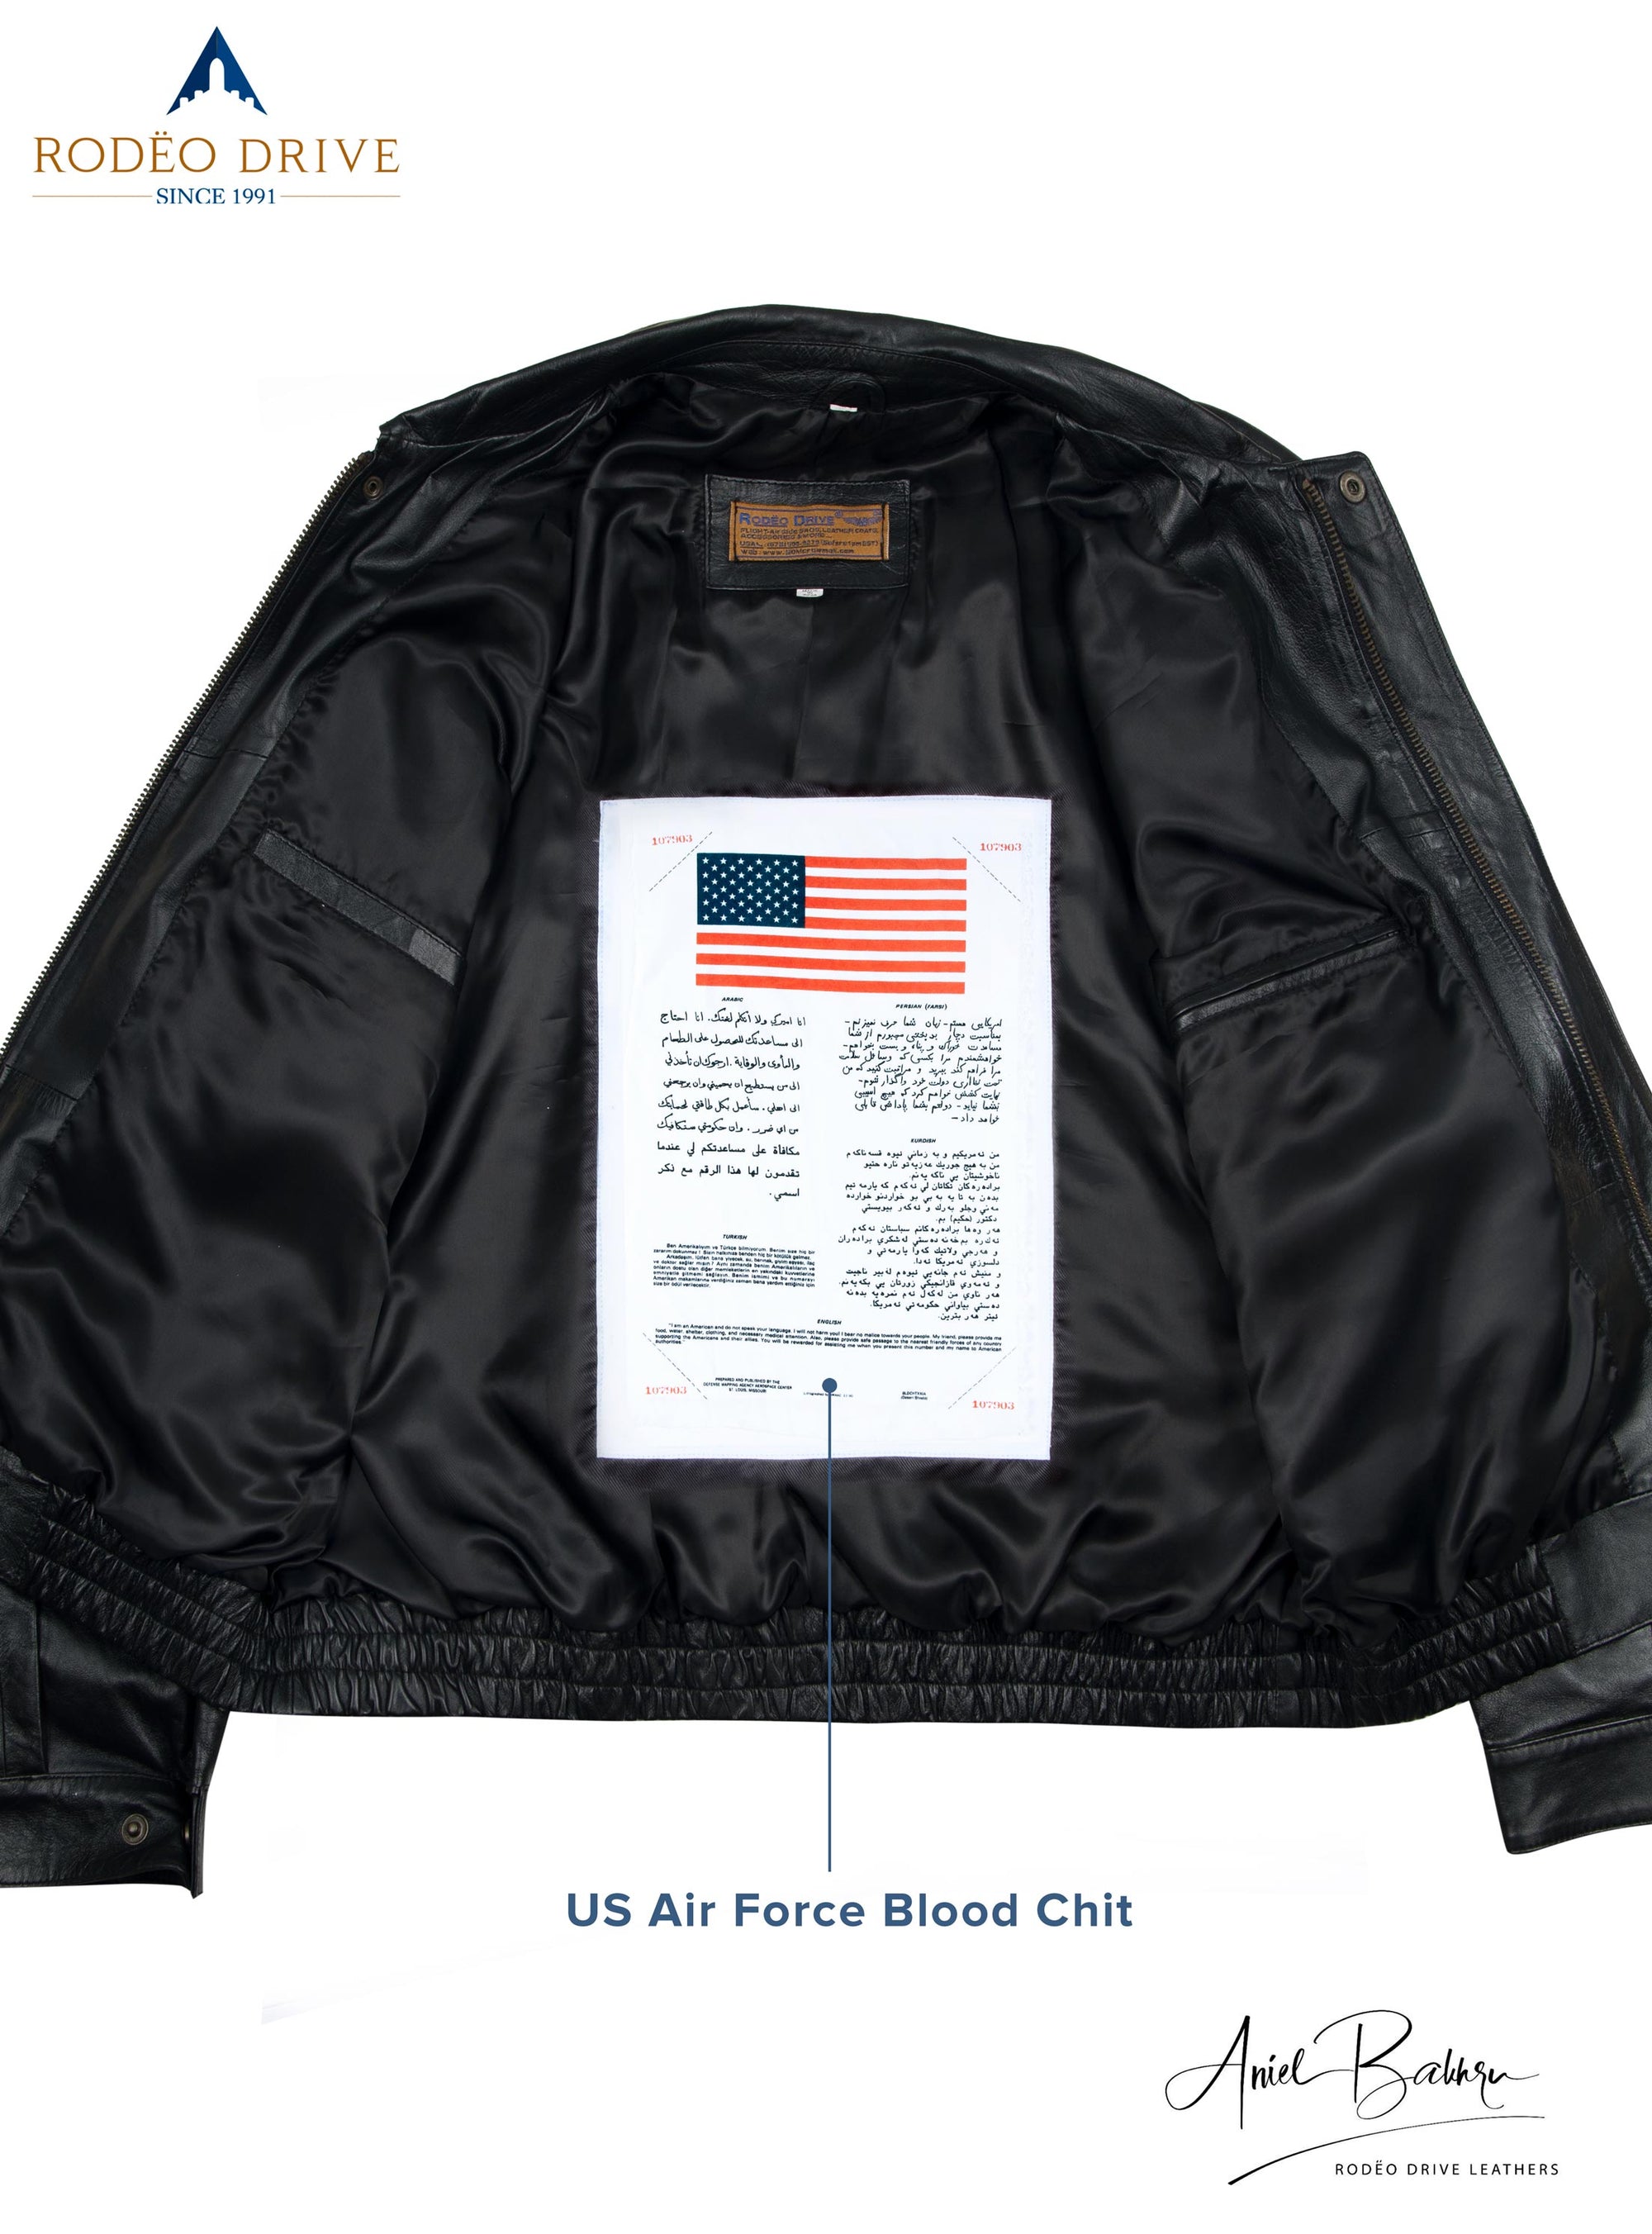 Inside image of ARMY HELICOPTER BOMBER JACKET. A USA flag with message sewed inside.